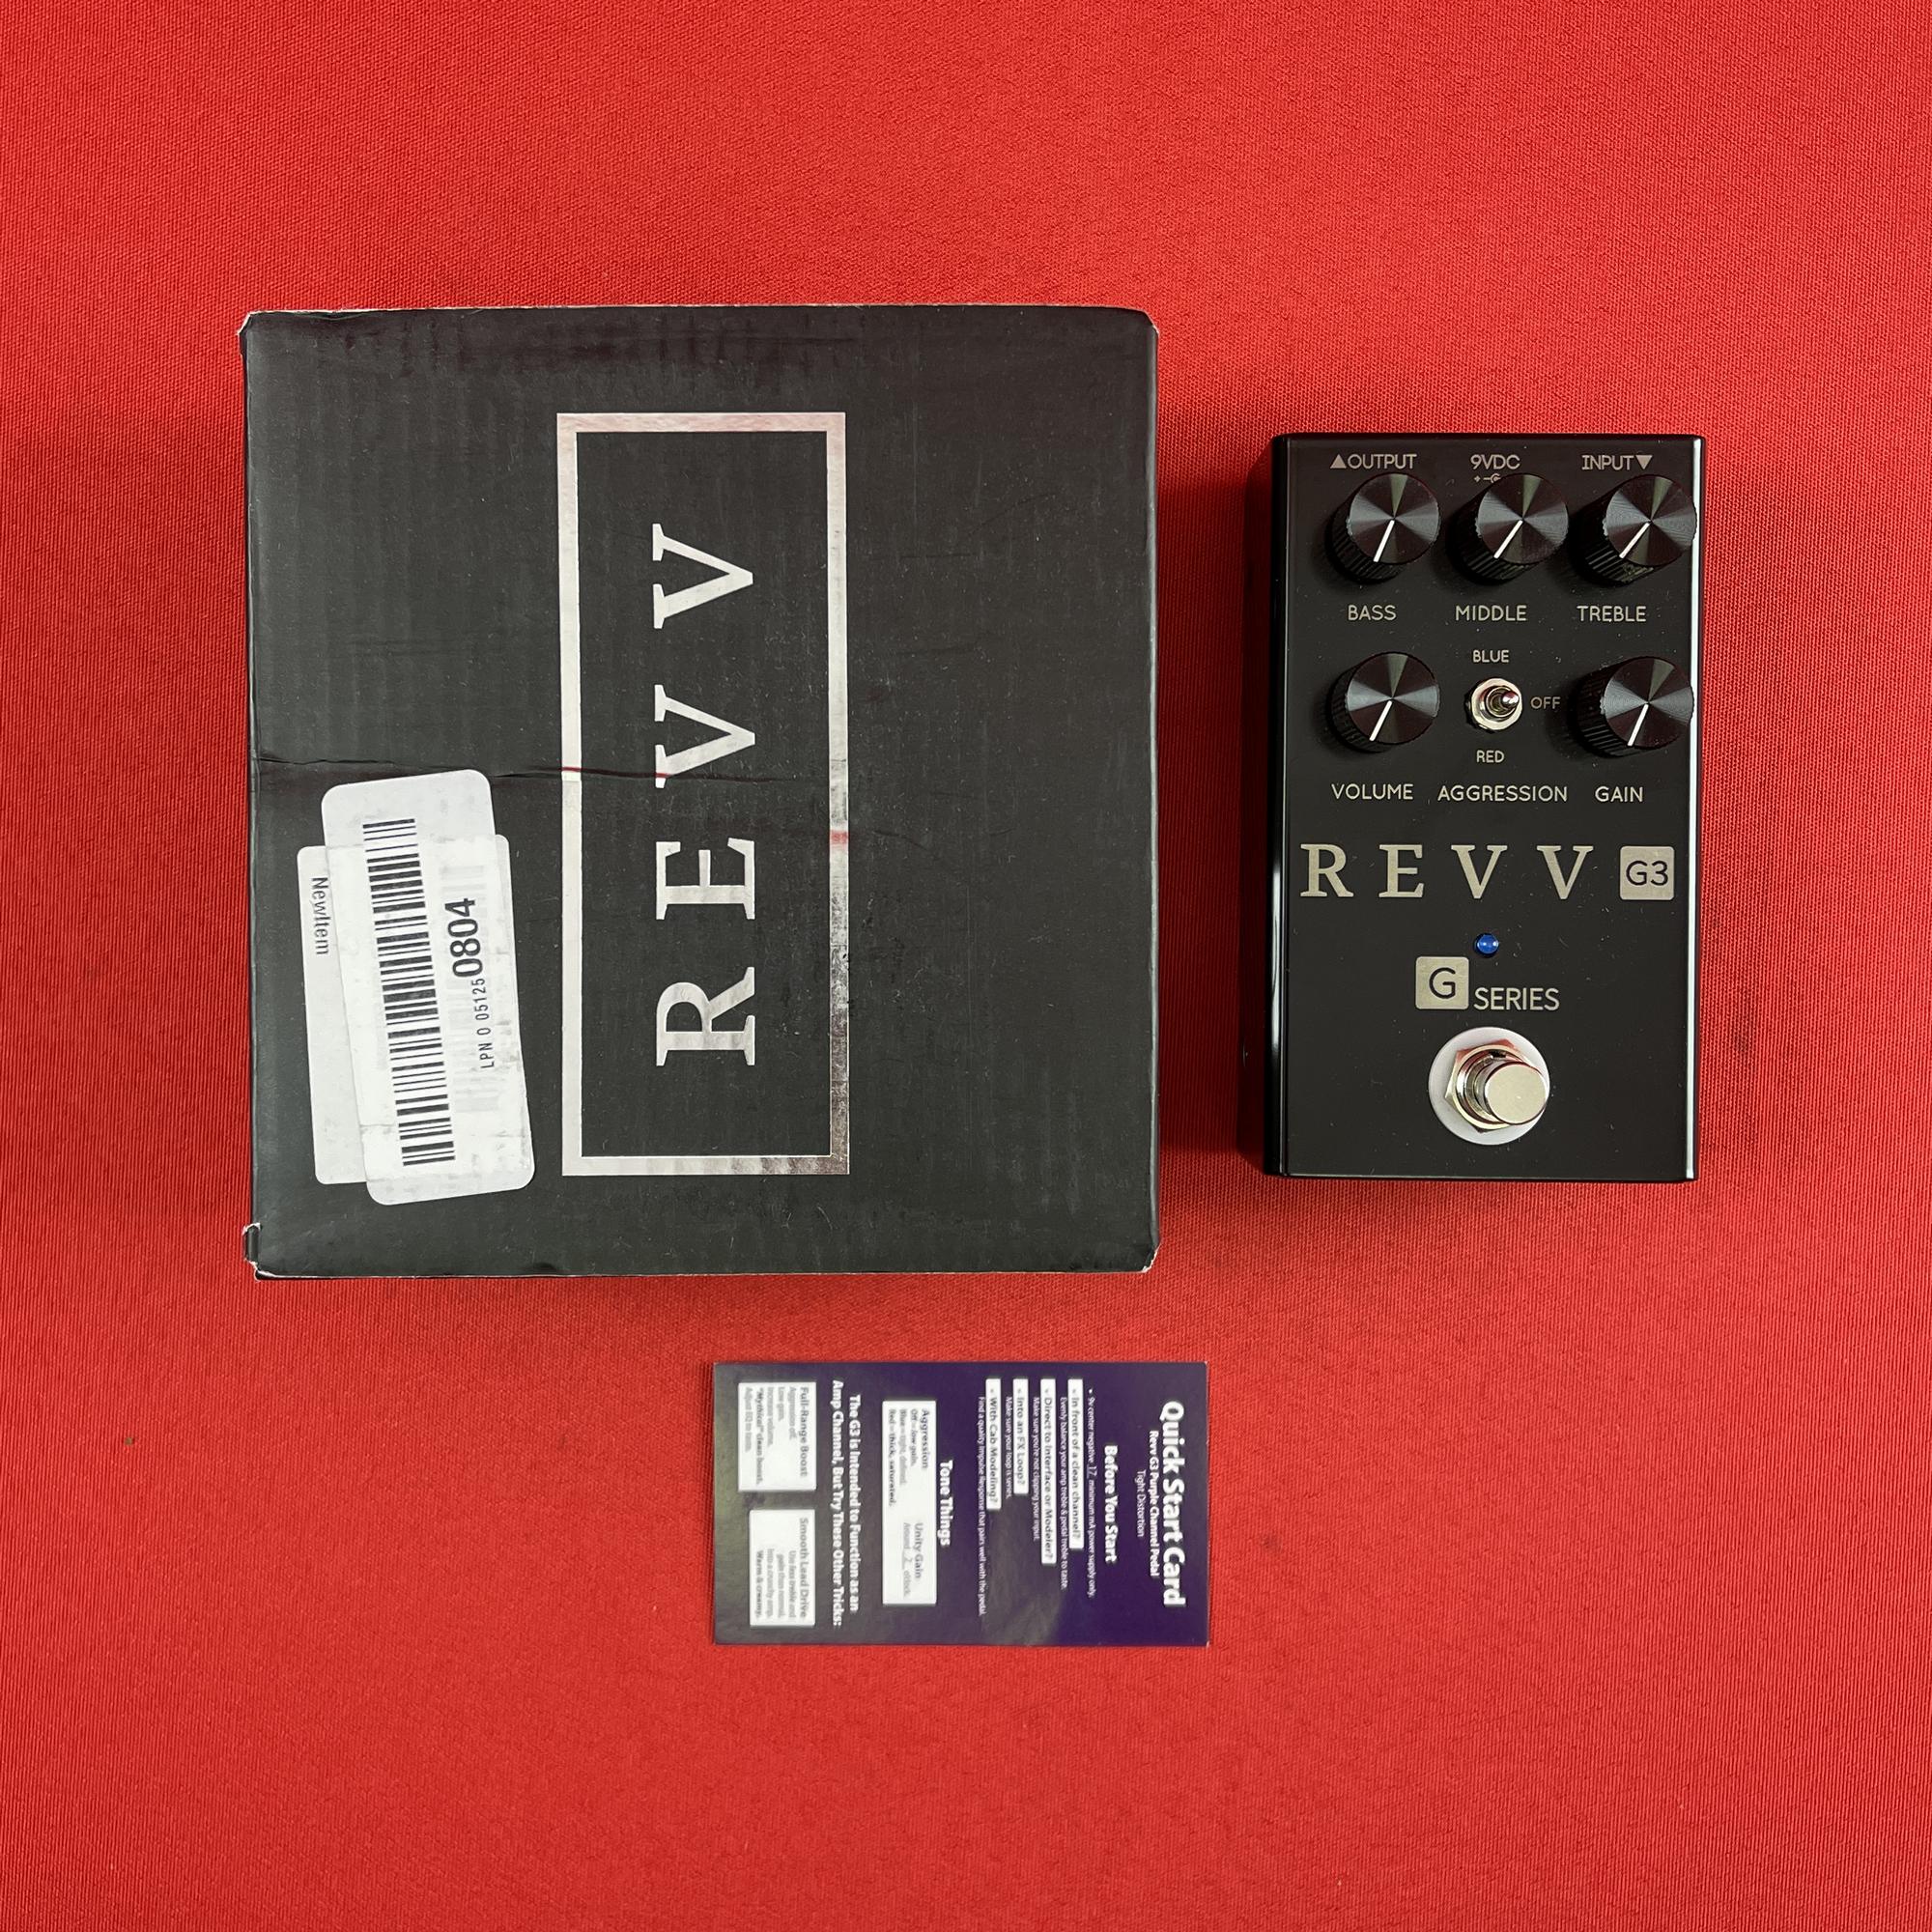 [USED] Revv Amplification G3 Distortion, Blackout Edition (Gear Hero Exclusive) (See Description)